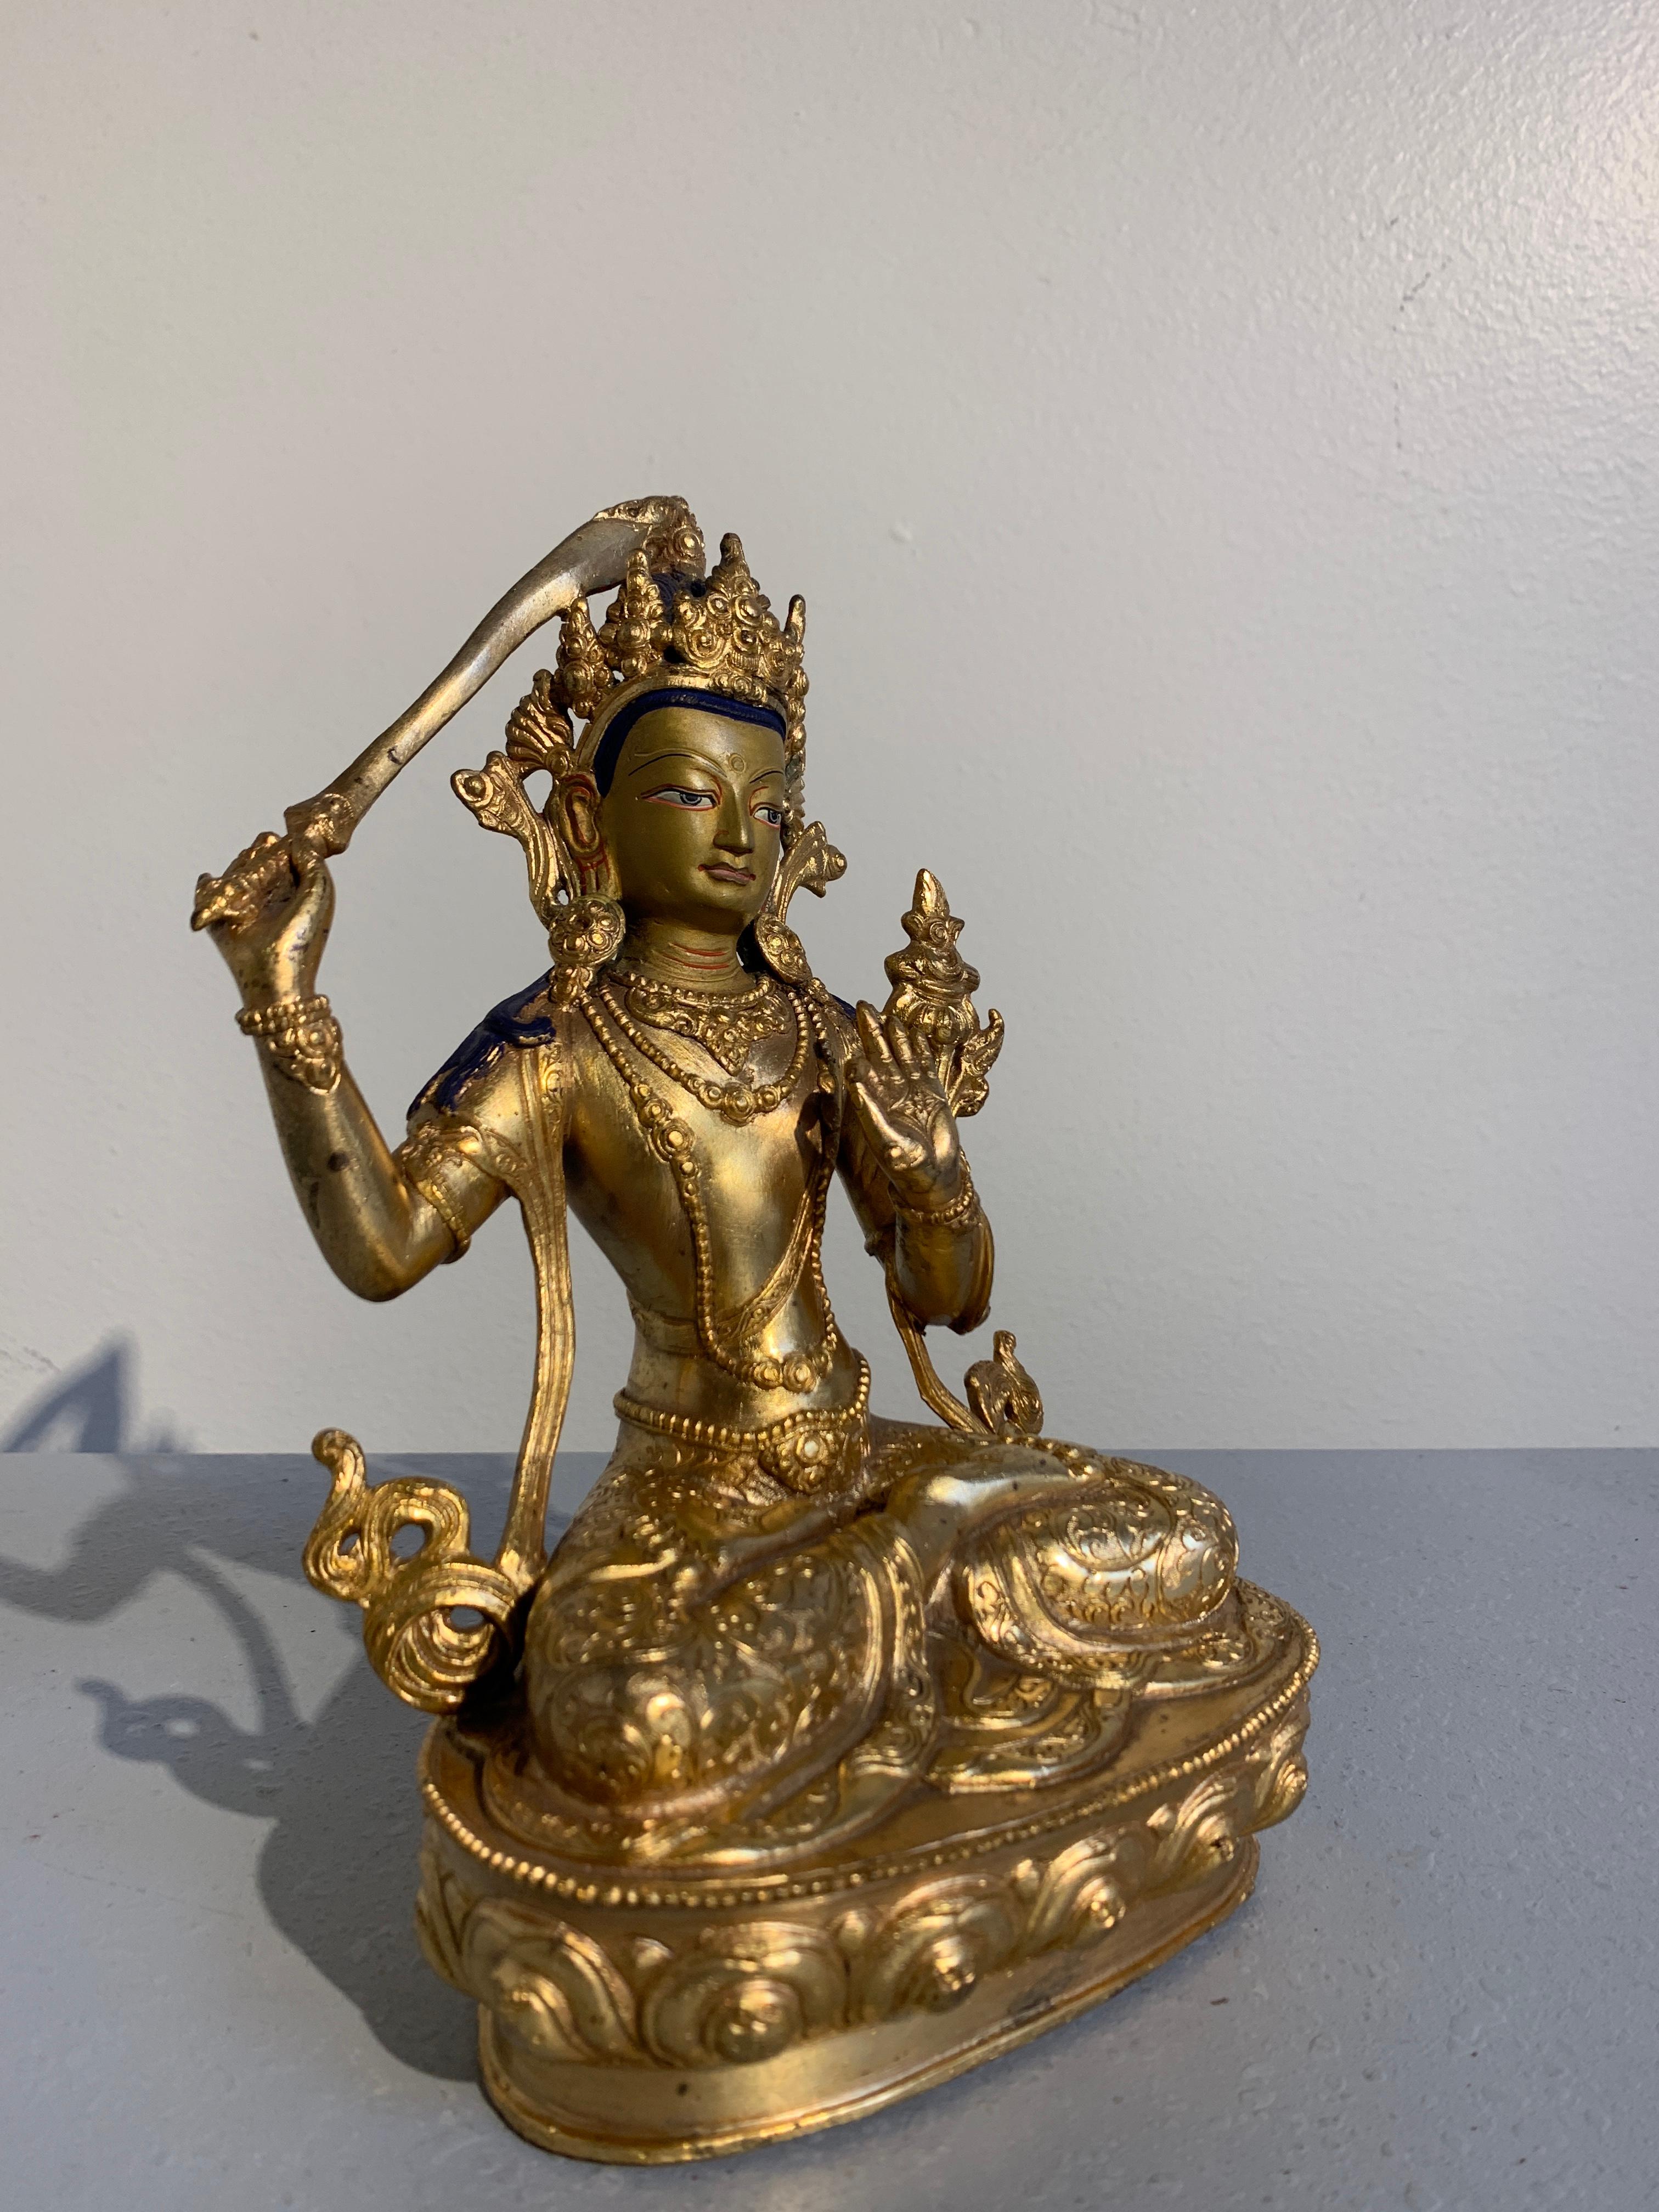 A lovely Nepalese gilt bronze figure of Manjushri, the Bodhisattva of Wisdom, early to mid 20th century. 

The Bodhisattva of Transcendent Wisdom sits upon a lotus pedestal, legs crossed in the full lotus position. The princely figure is dressed in